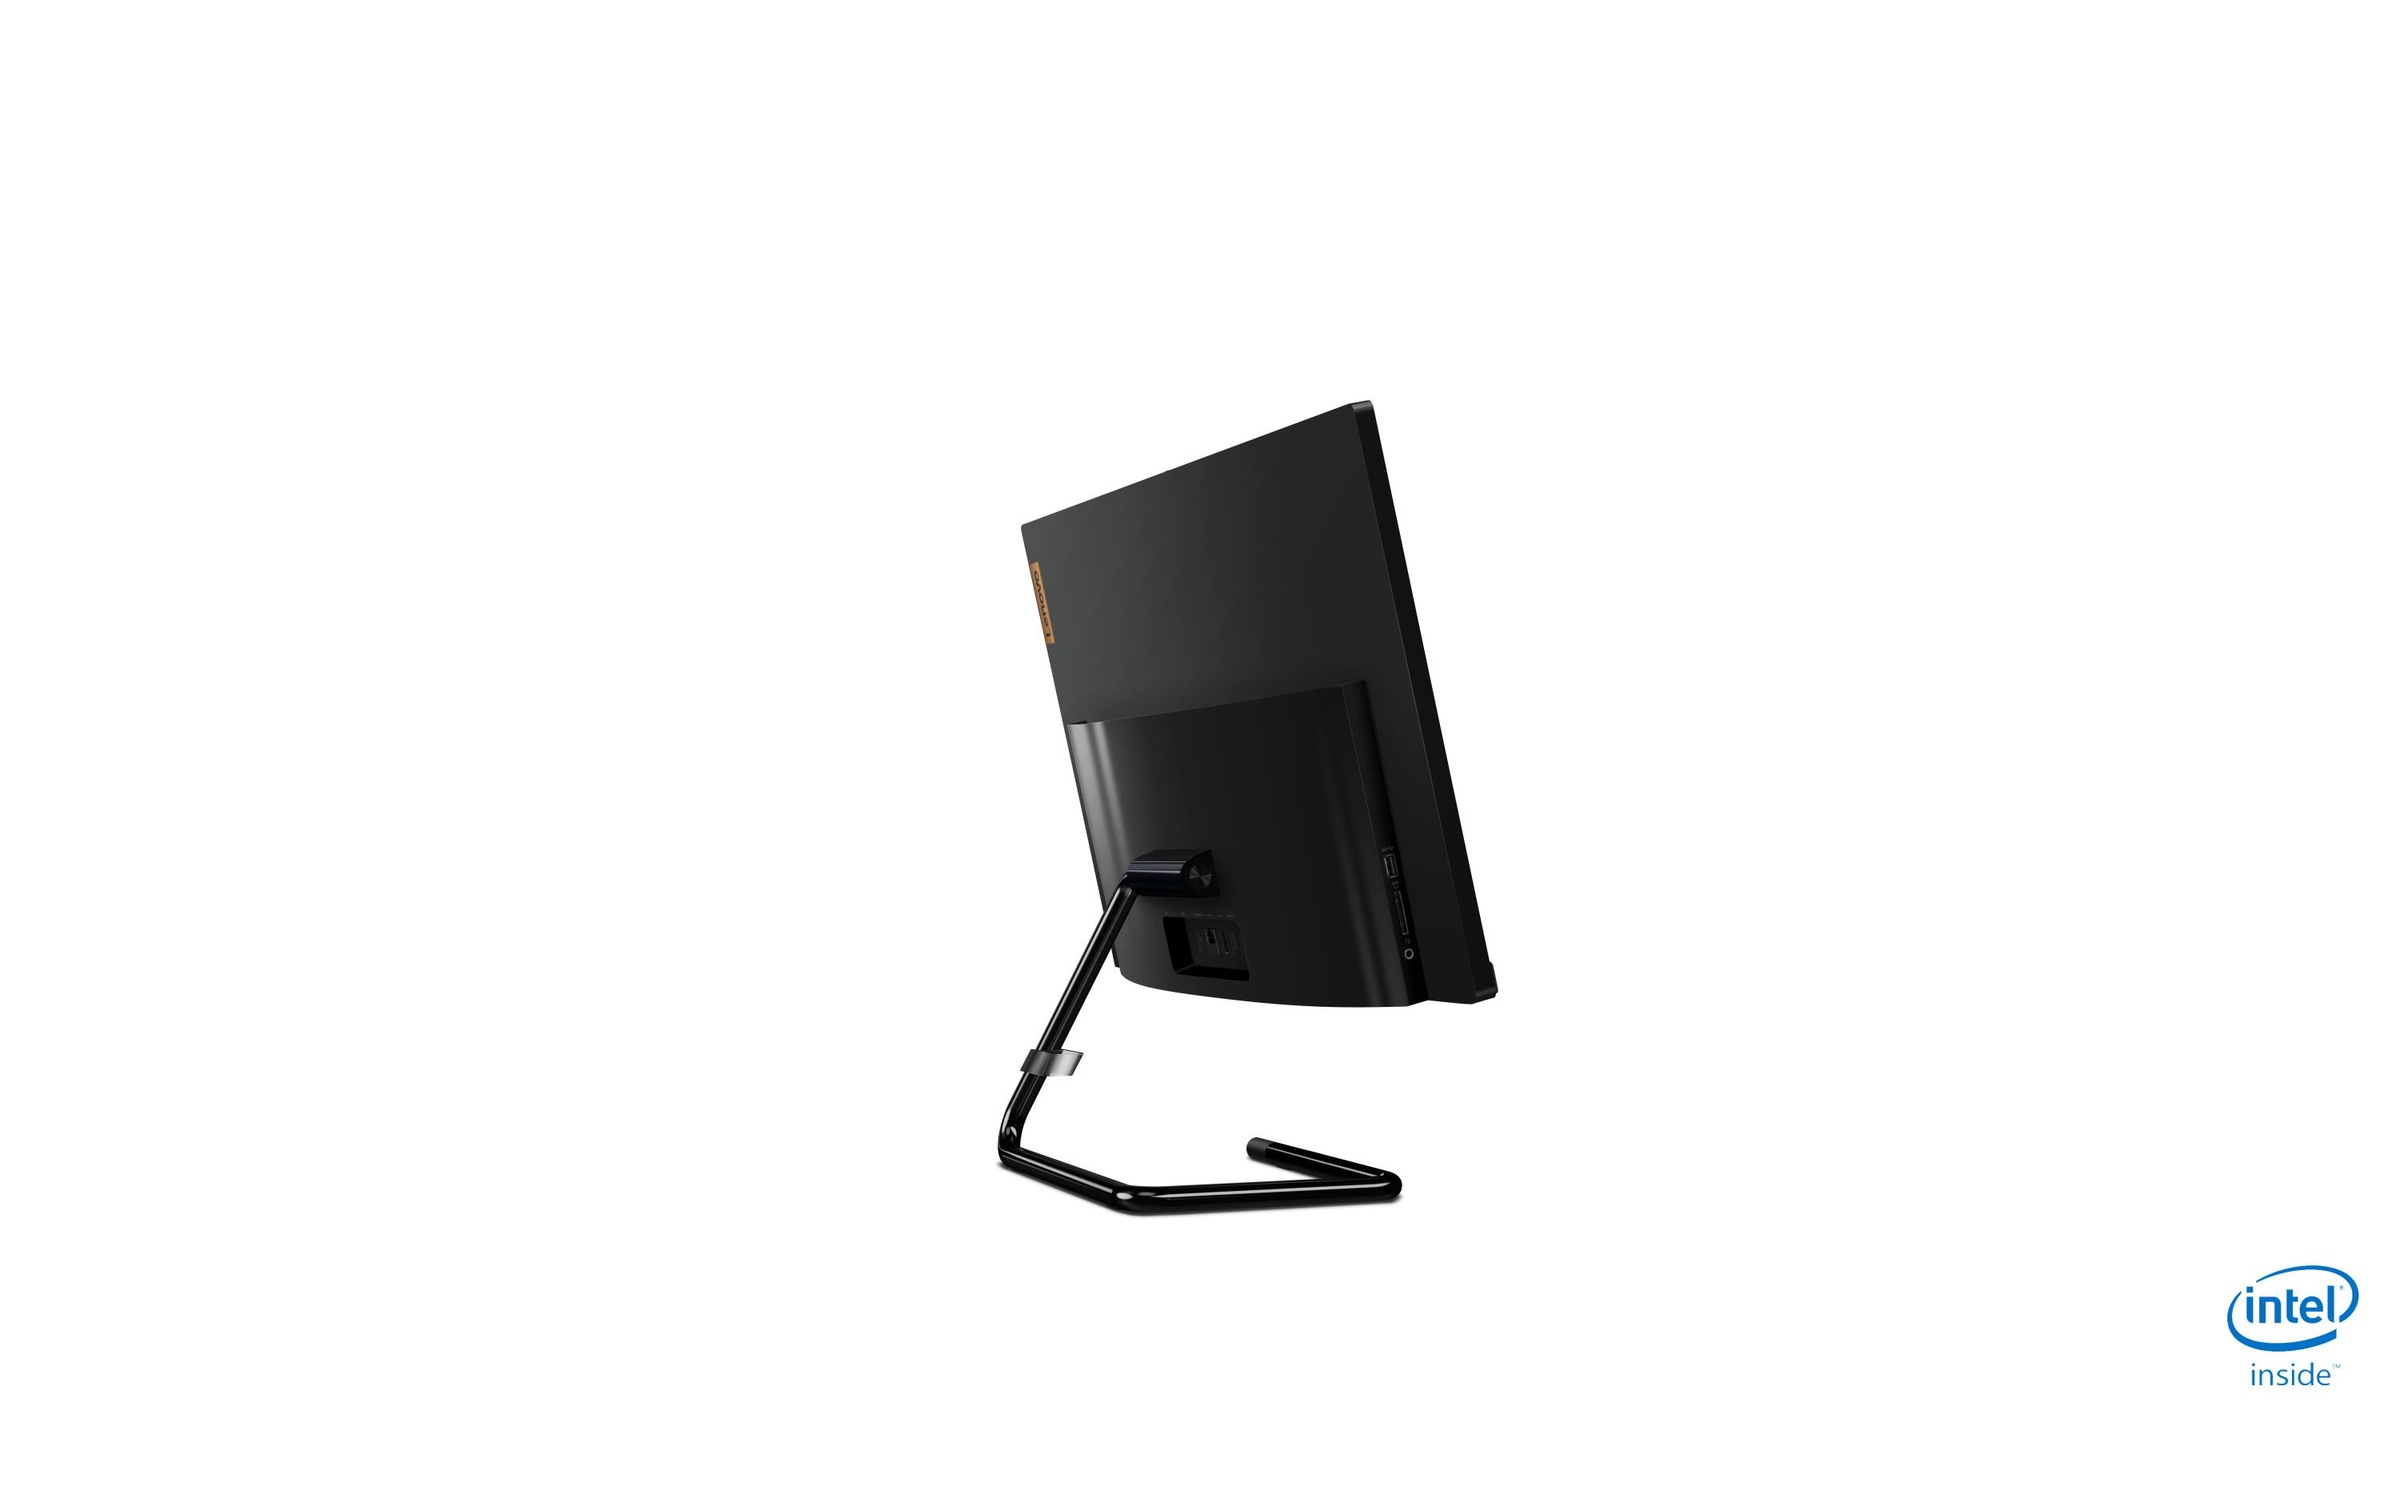 Lenovo All-in-One PC